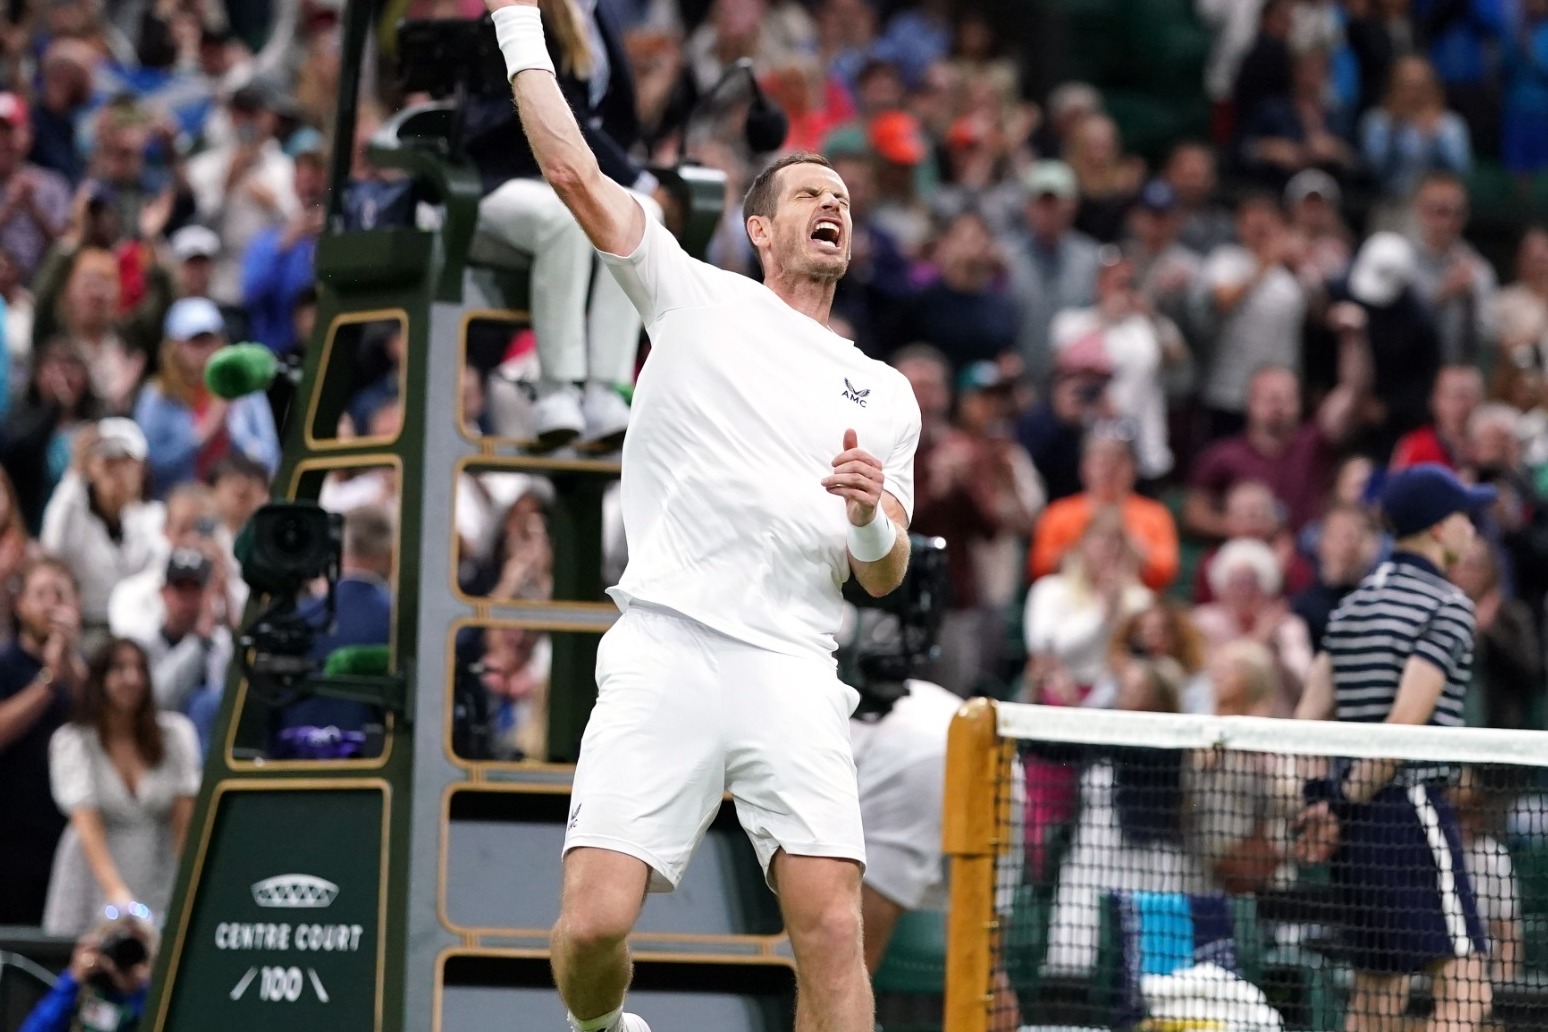 Andy Murray utilises underarm serve in first-round win at Wimbledon 